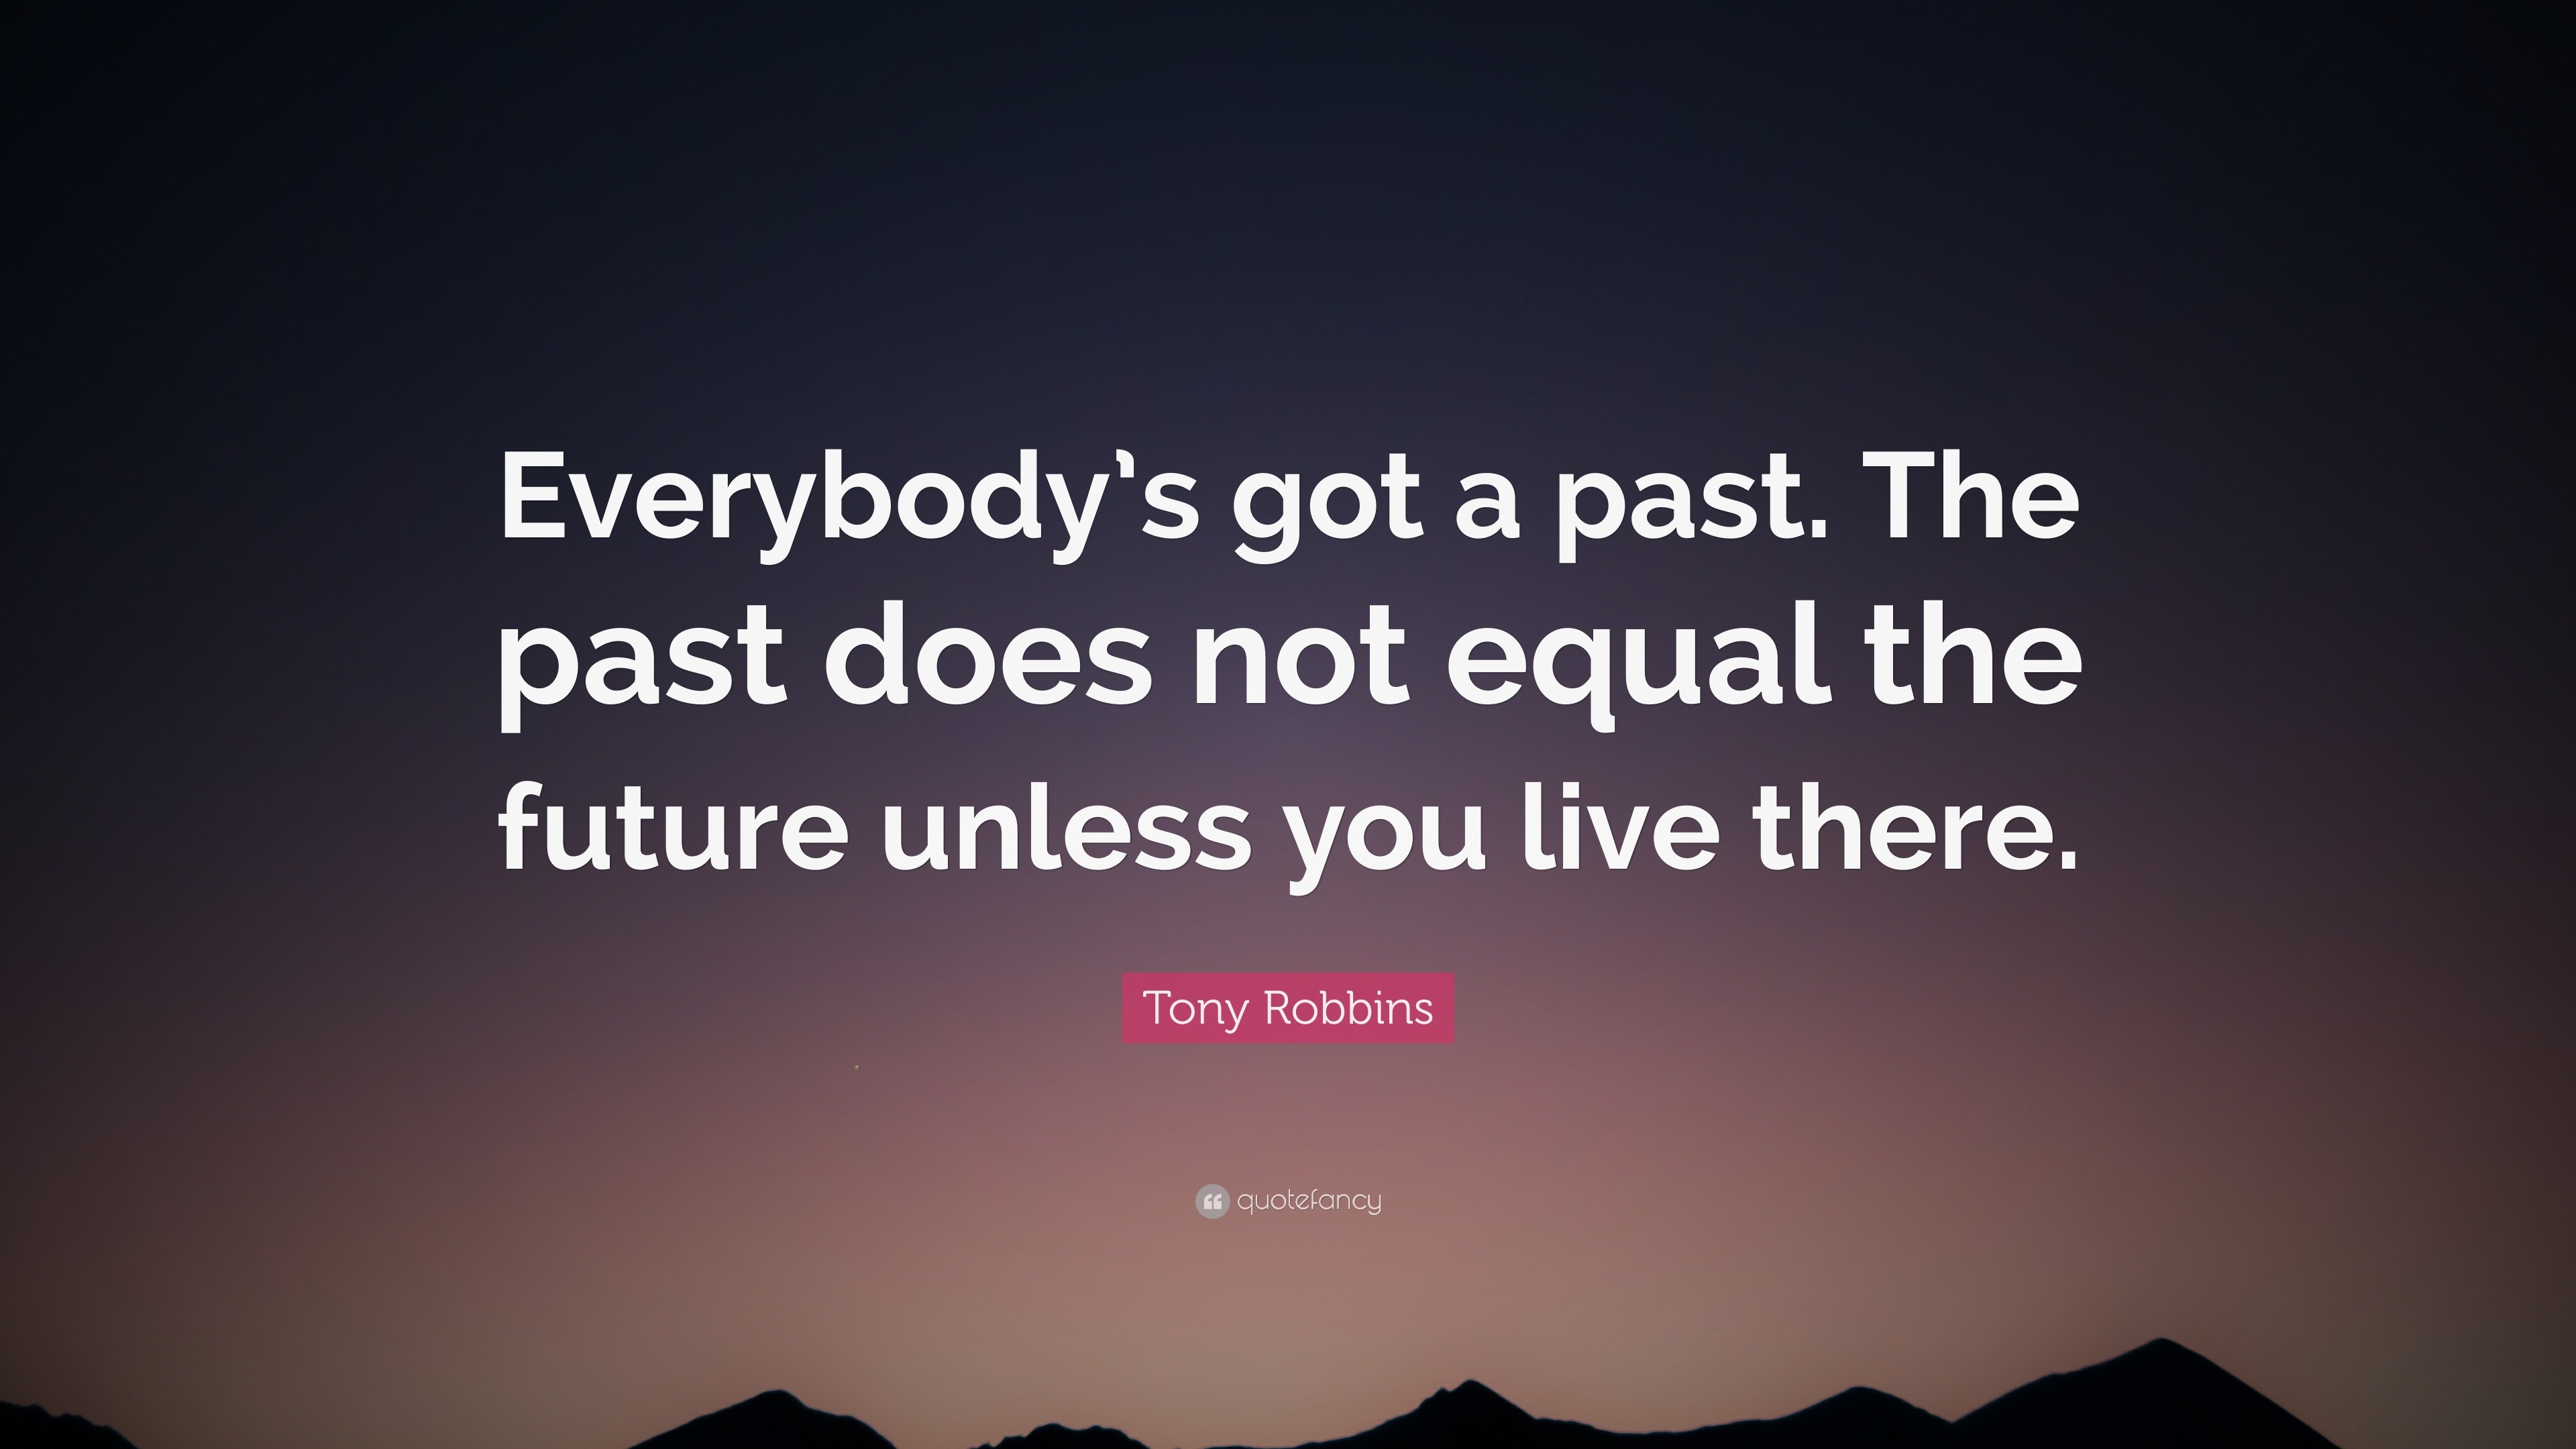 Tony Robbins Quote: “Everybody’s got a past. The past does not equal ...